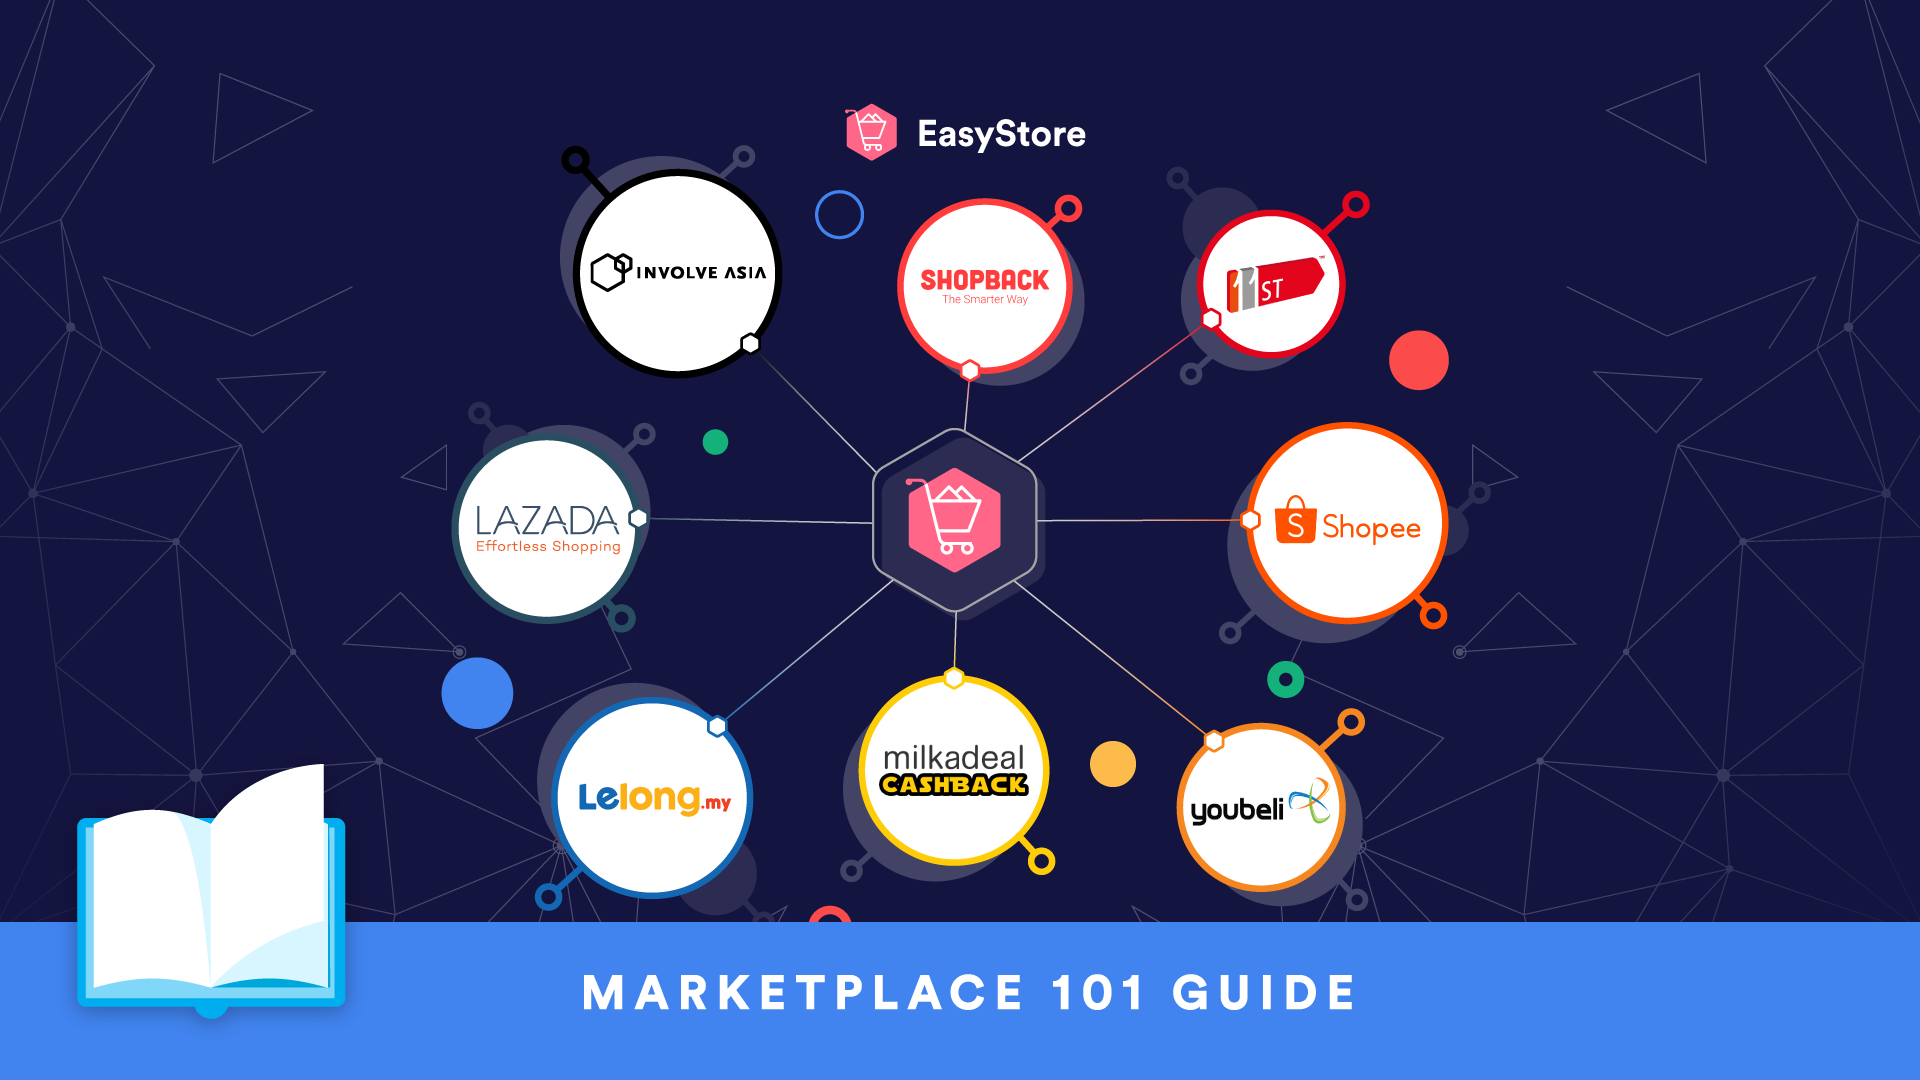 Online Marketplace 101: Effective Strategies to Sell More (Without Lowering Your Price) | EasyStore